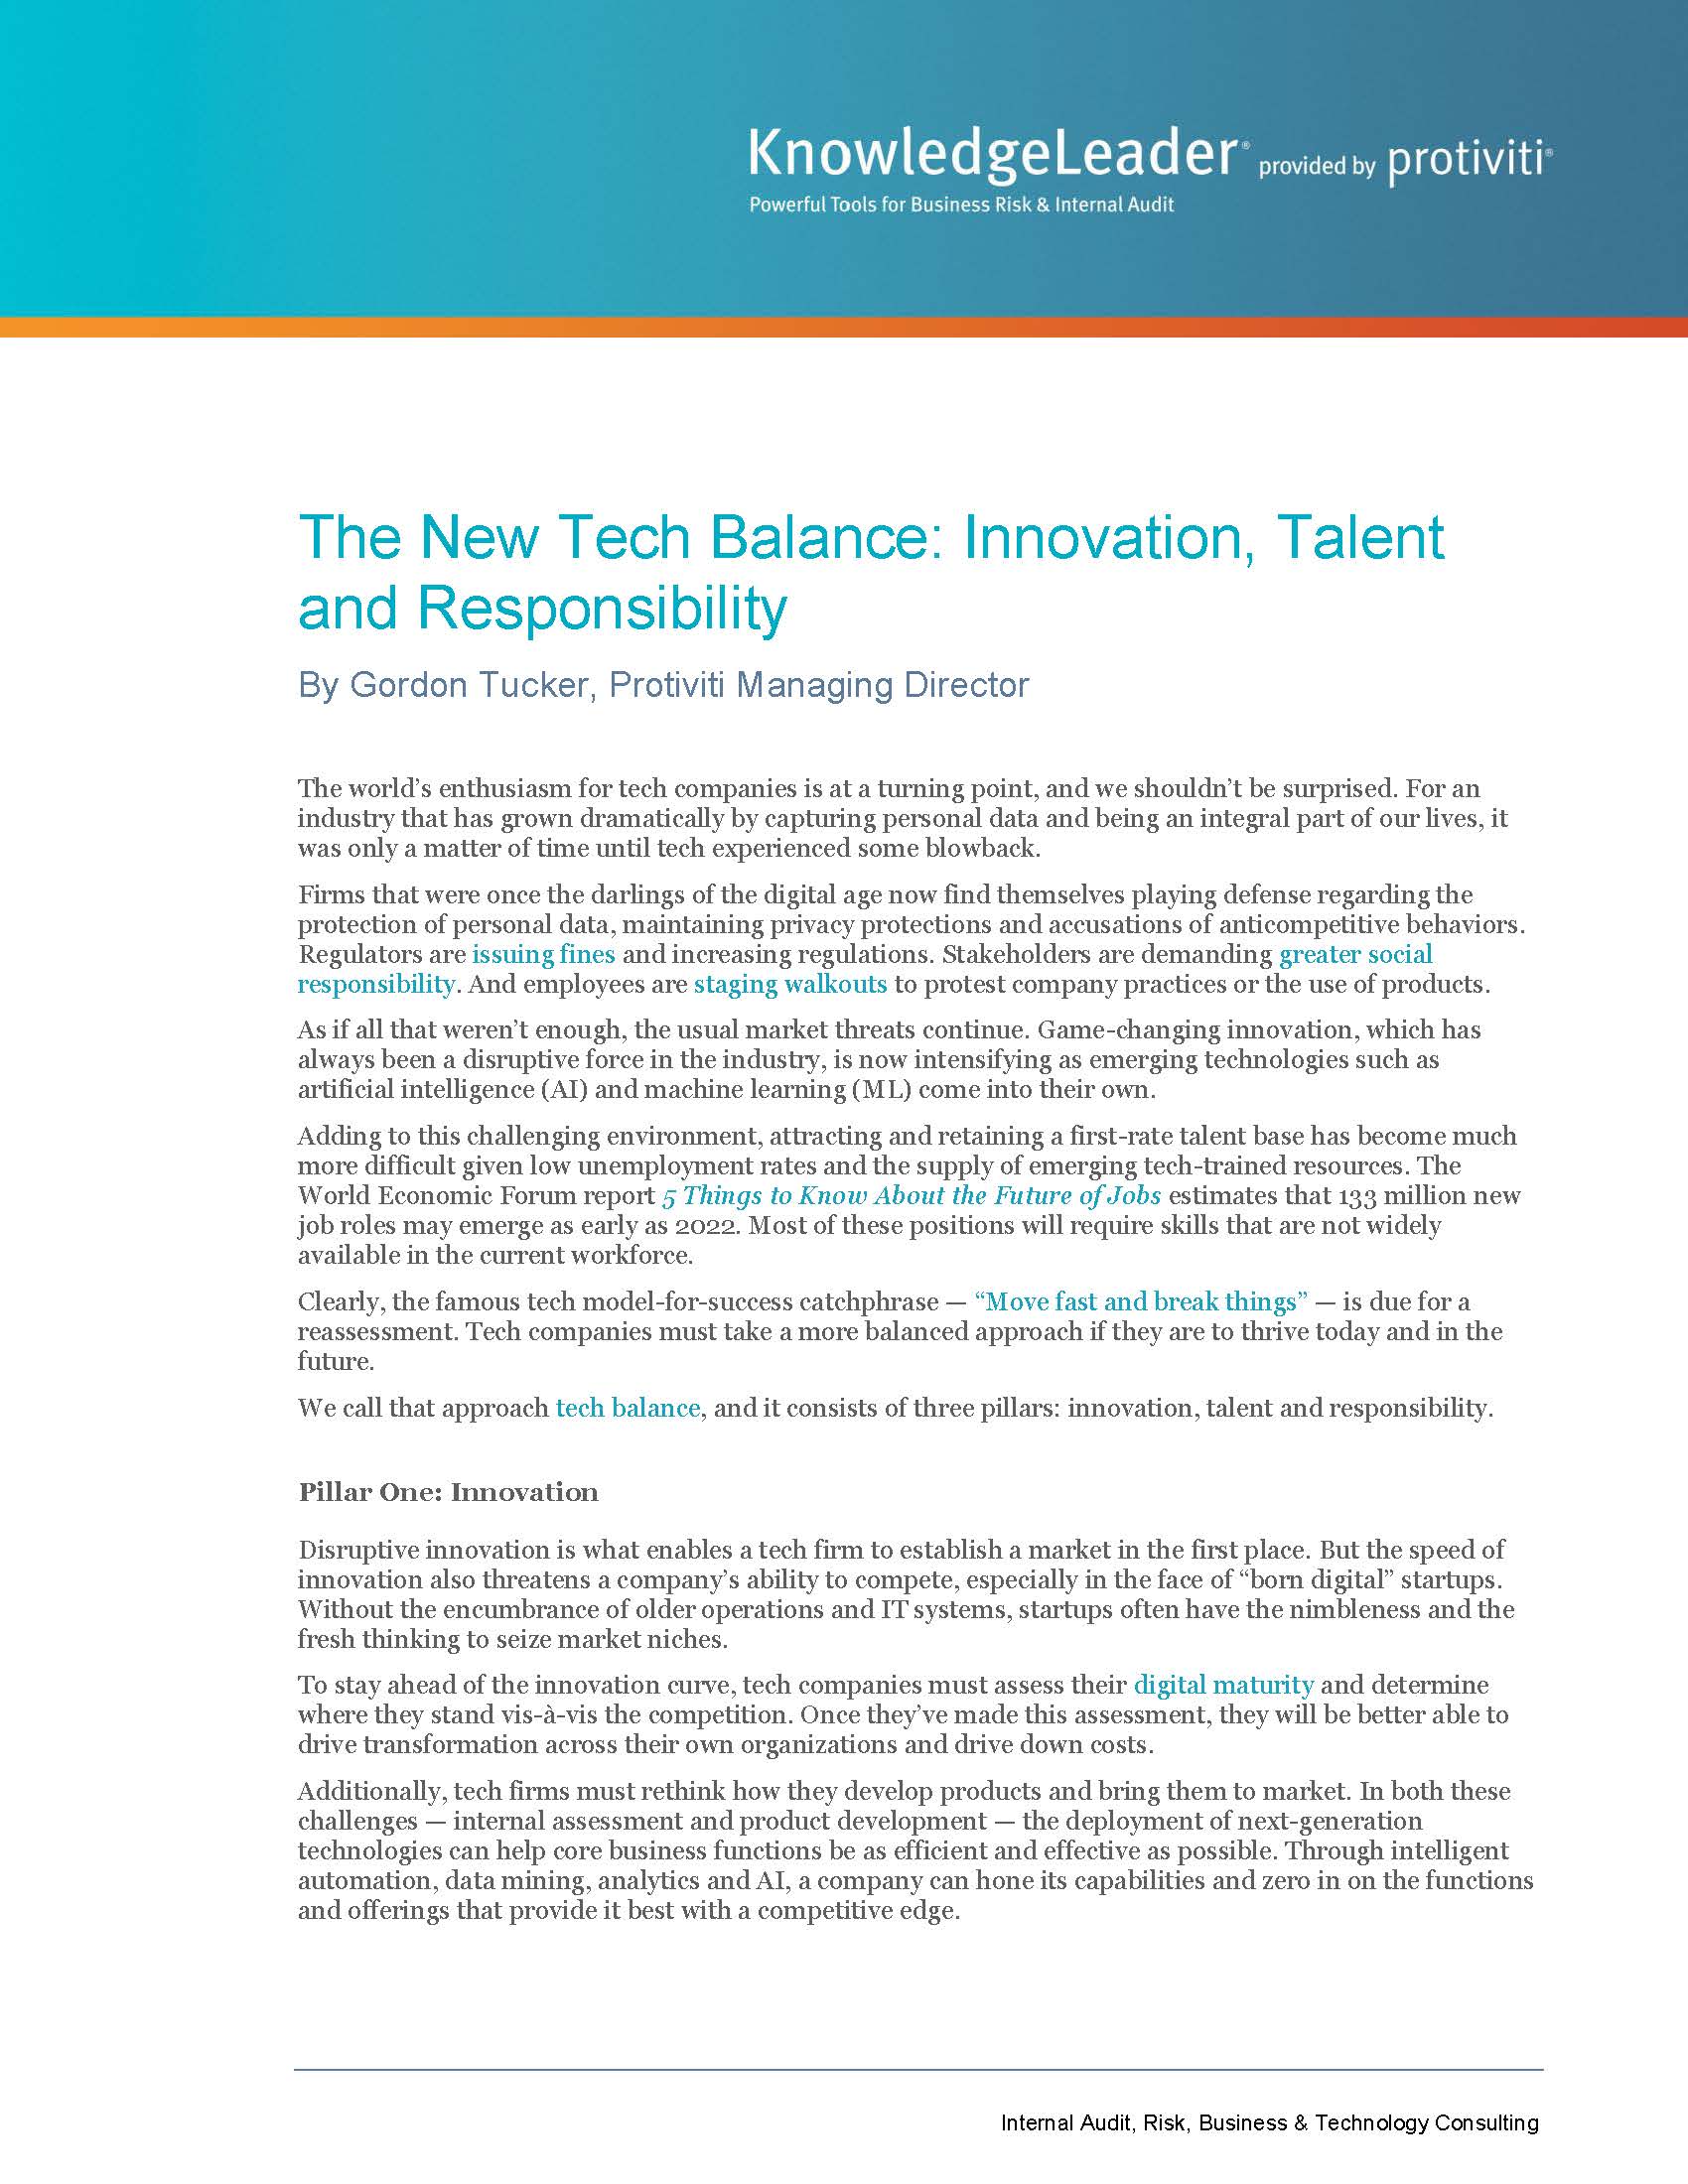 Screenshot of the first page of The New Tech Balance Innovation, Talent and Responsibility